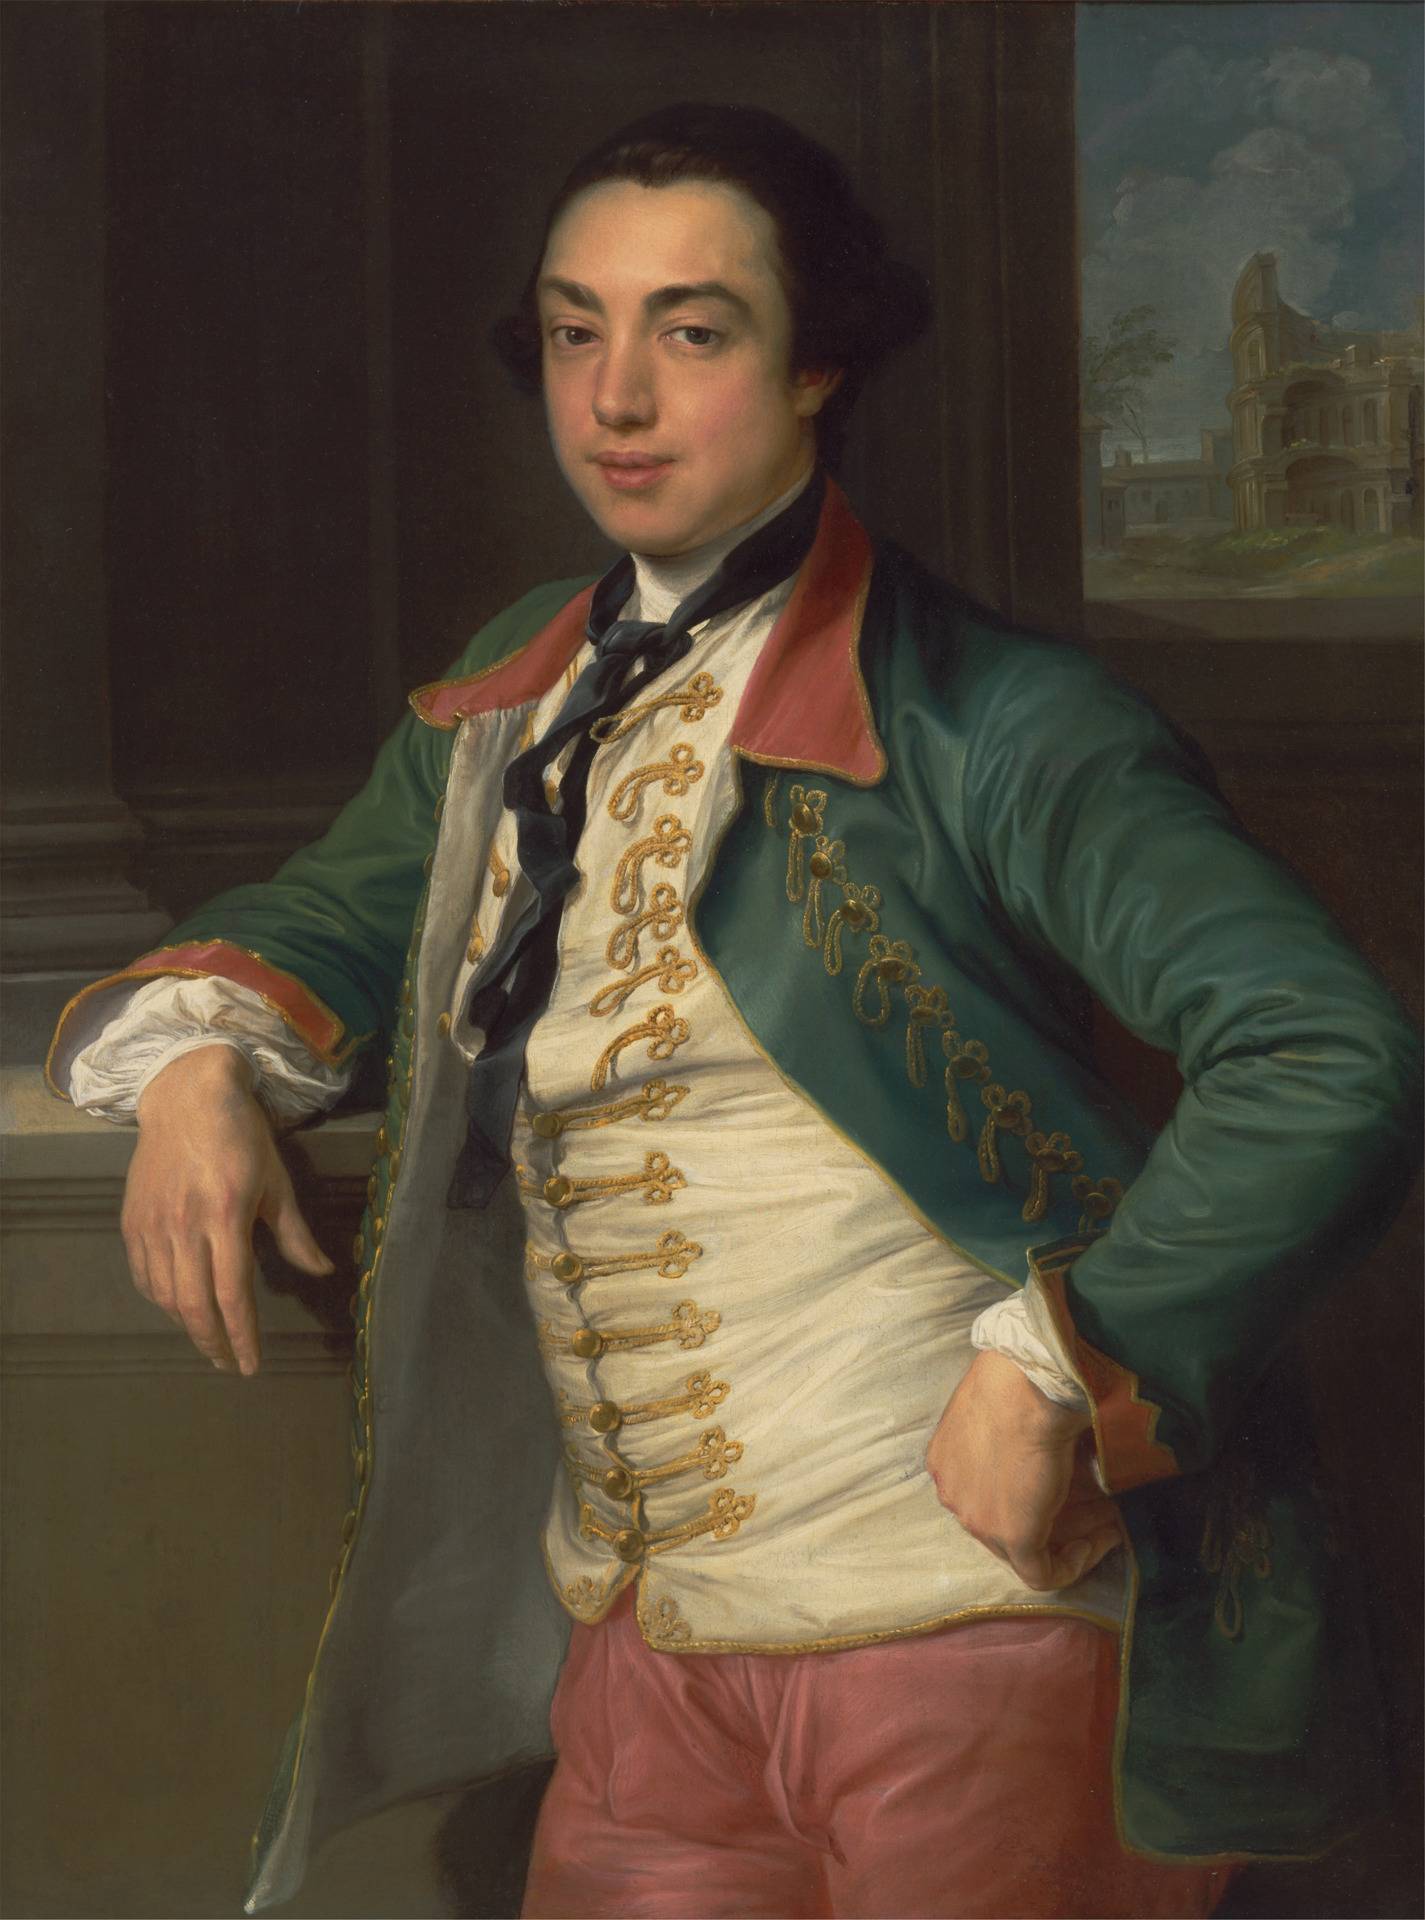 James Caulfeild, fourth Viscount Charlemont (Later first Earl of Charlemont) by Pompeo Batoni (1708–1787). Oil on canvas. Dated between 1753 and 1756. Yale Center for British Art, Paul Mellon Collection. 